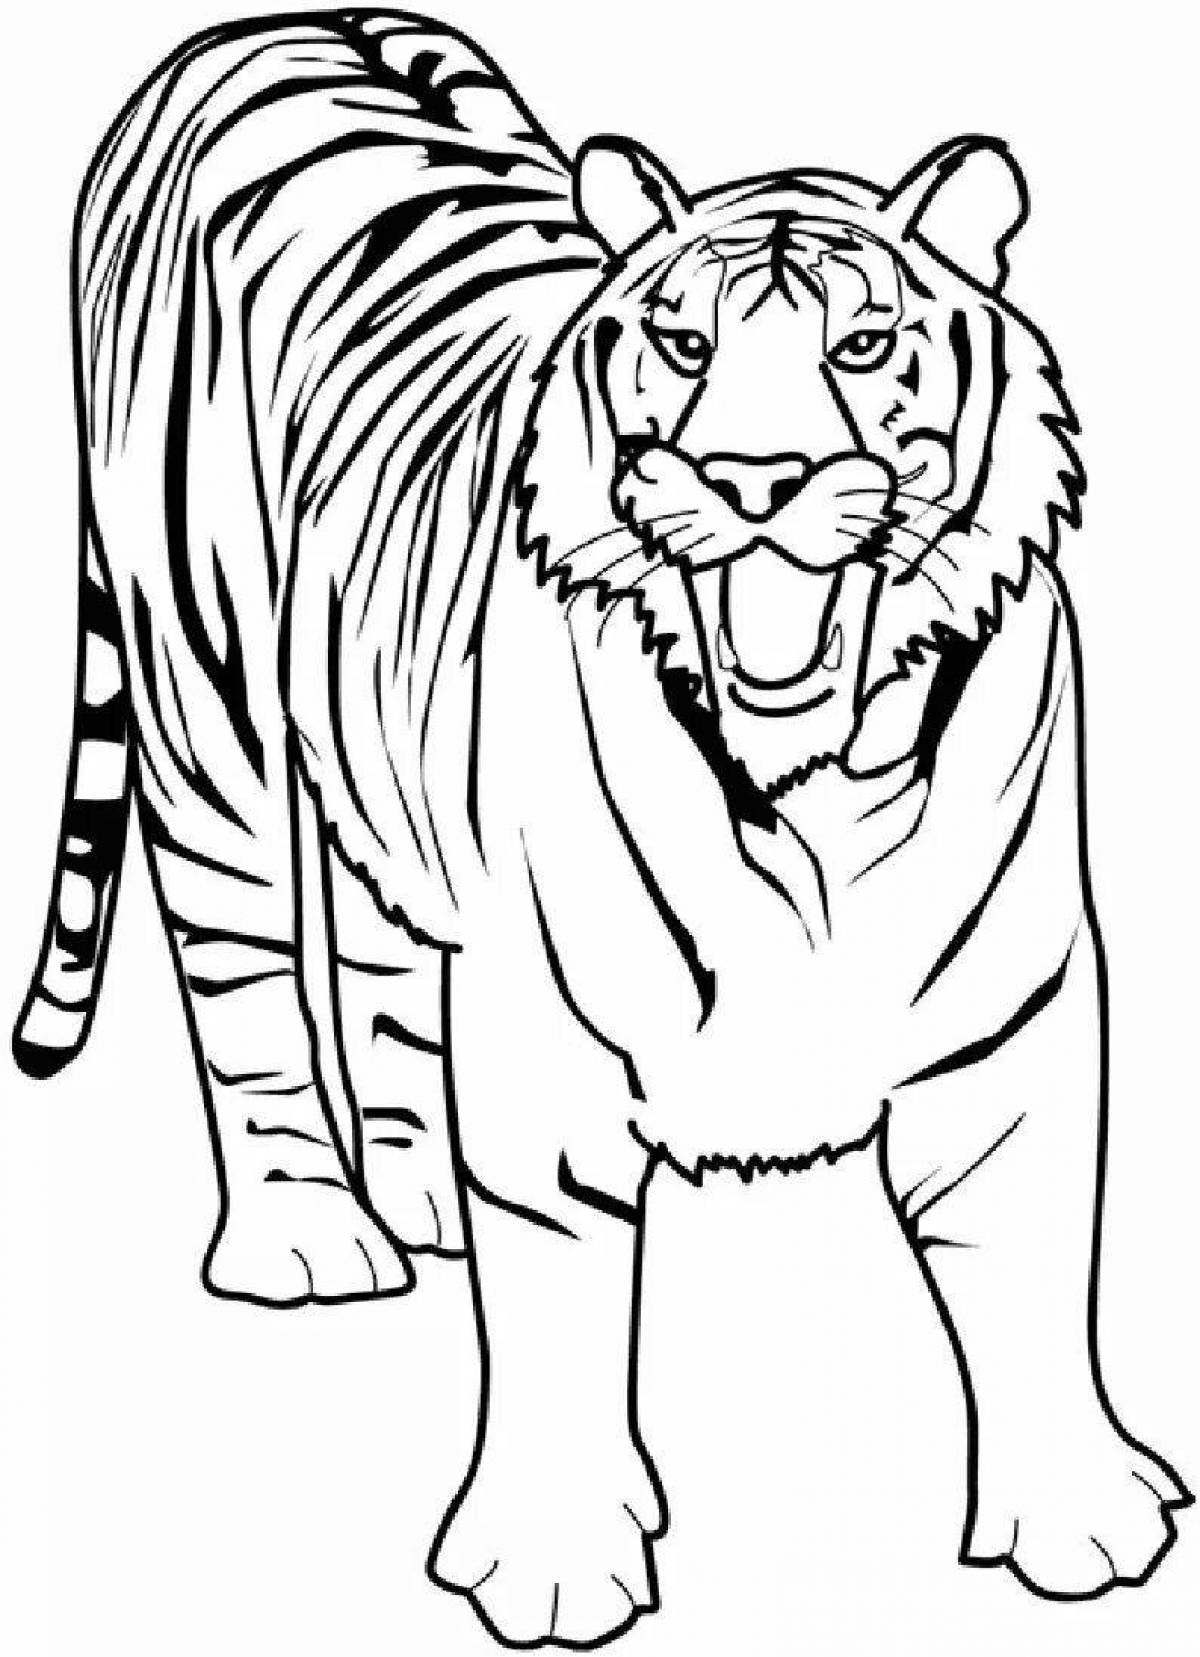 Ferocious tiger coloring book for kids